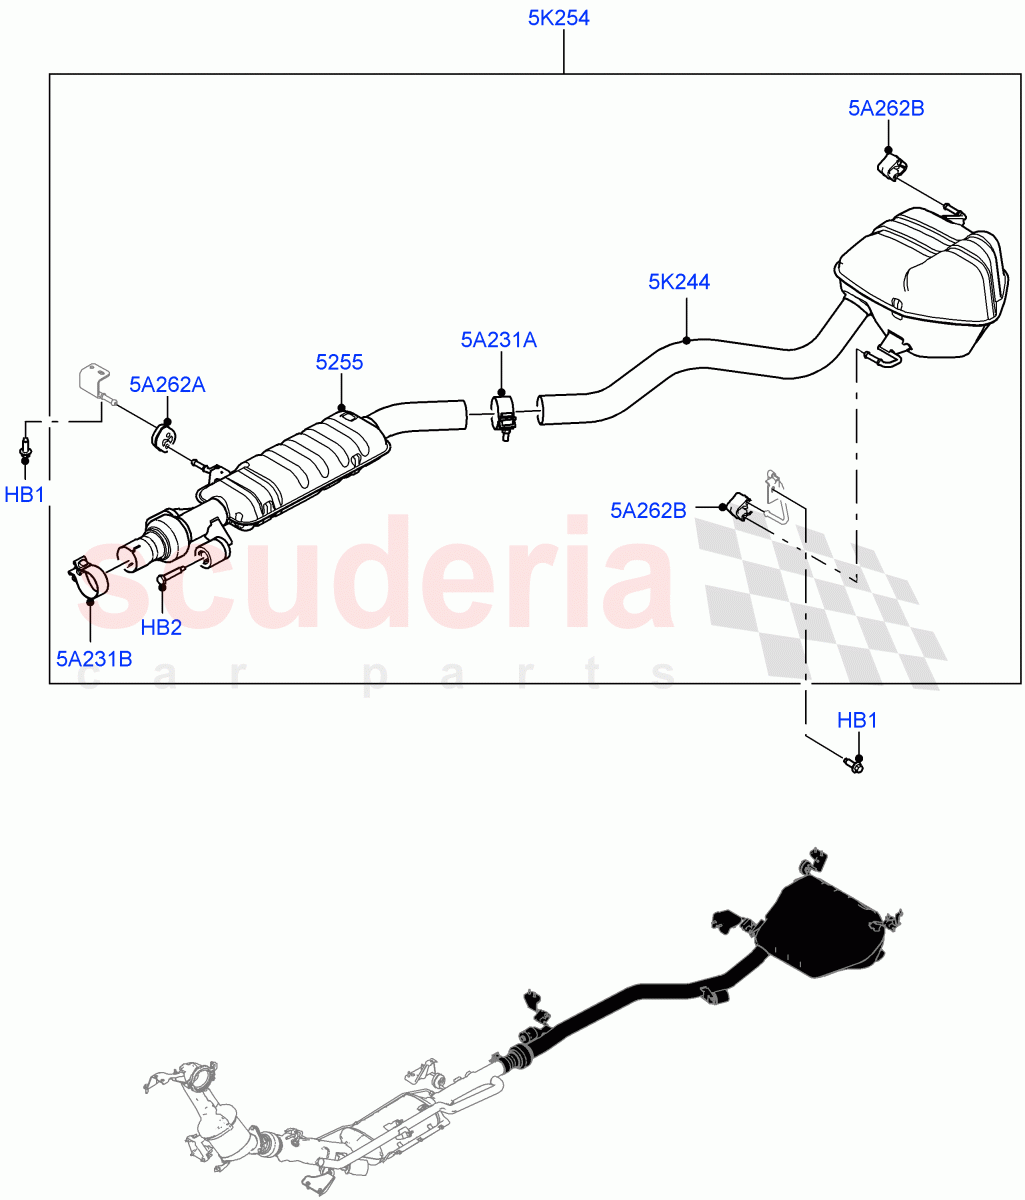 Rear Exhaust System(2.0L AJ20D4 Diesel Mid PTA,Itatiaia (Brazil))((V)FROMLT000001) of Land Rover Land Rover Discovery Sport (2015+) [2.0 Turbo Diesel]